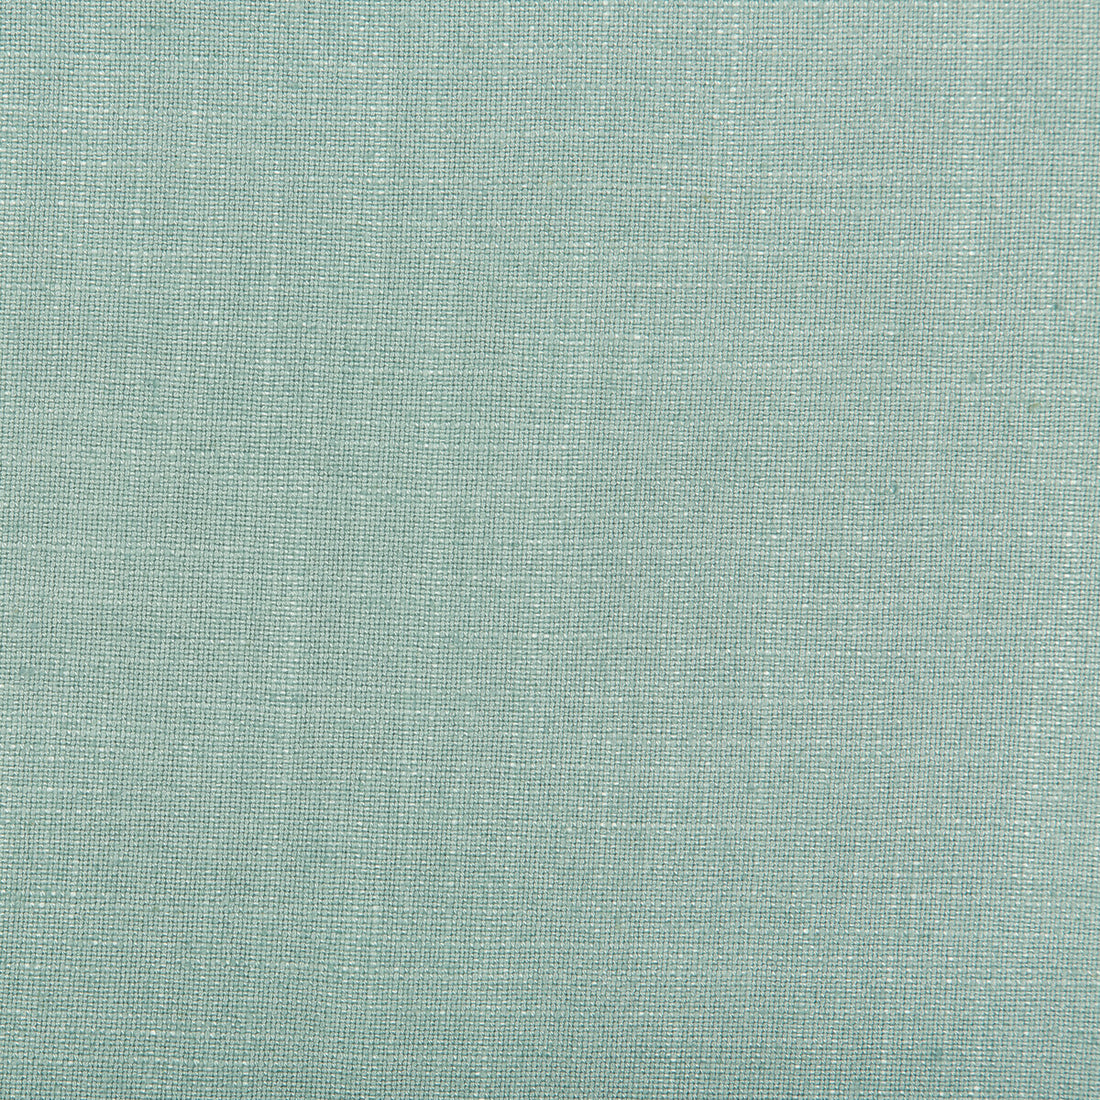 Aura fabric in pool color - pattern 35520.135.0 - by Kravet Design